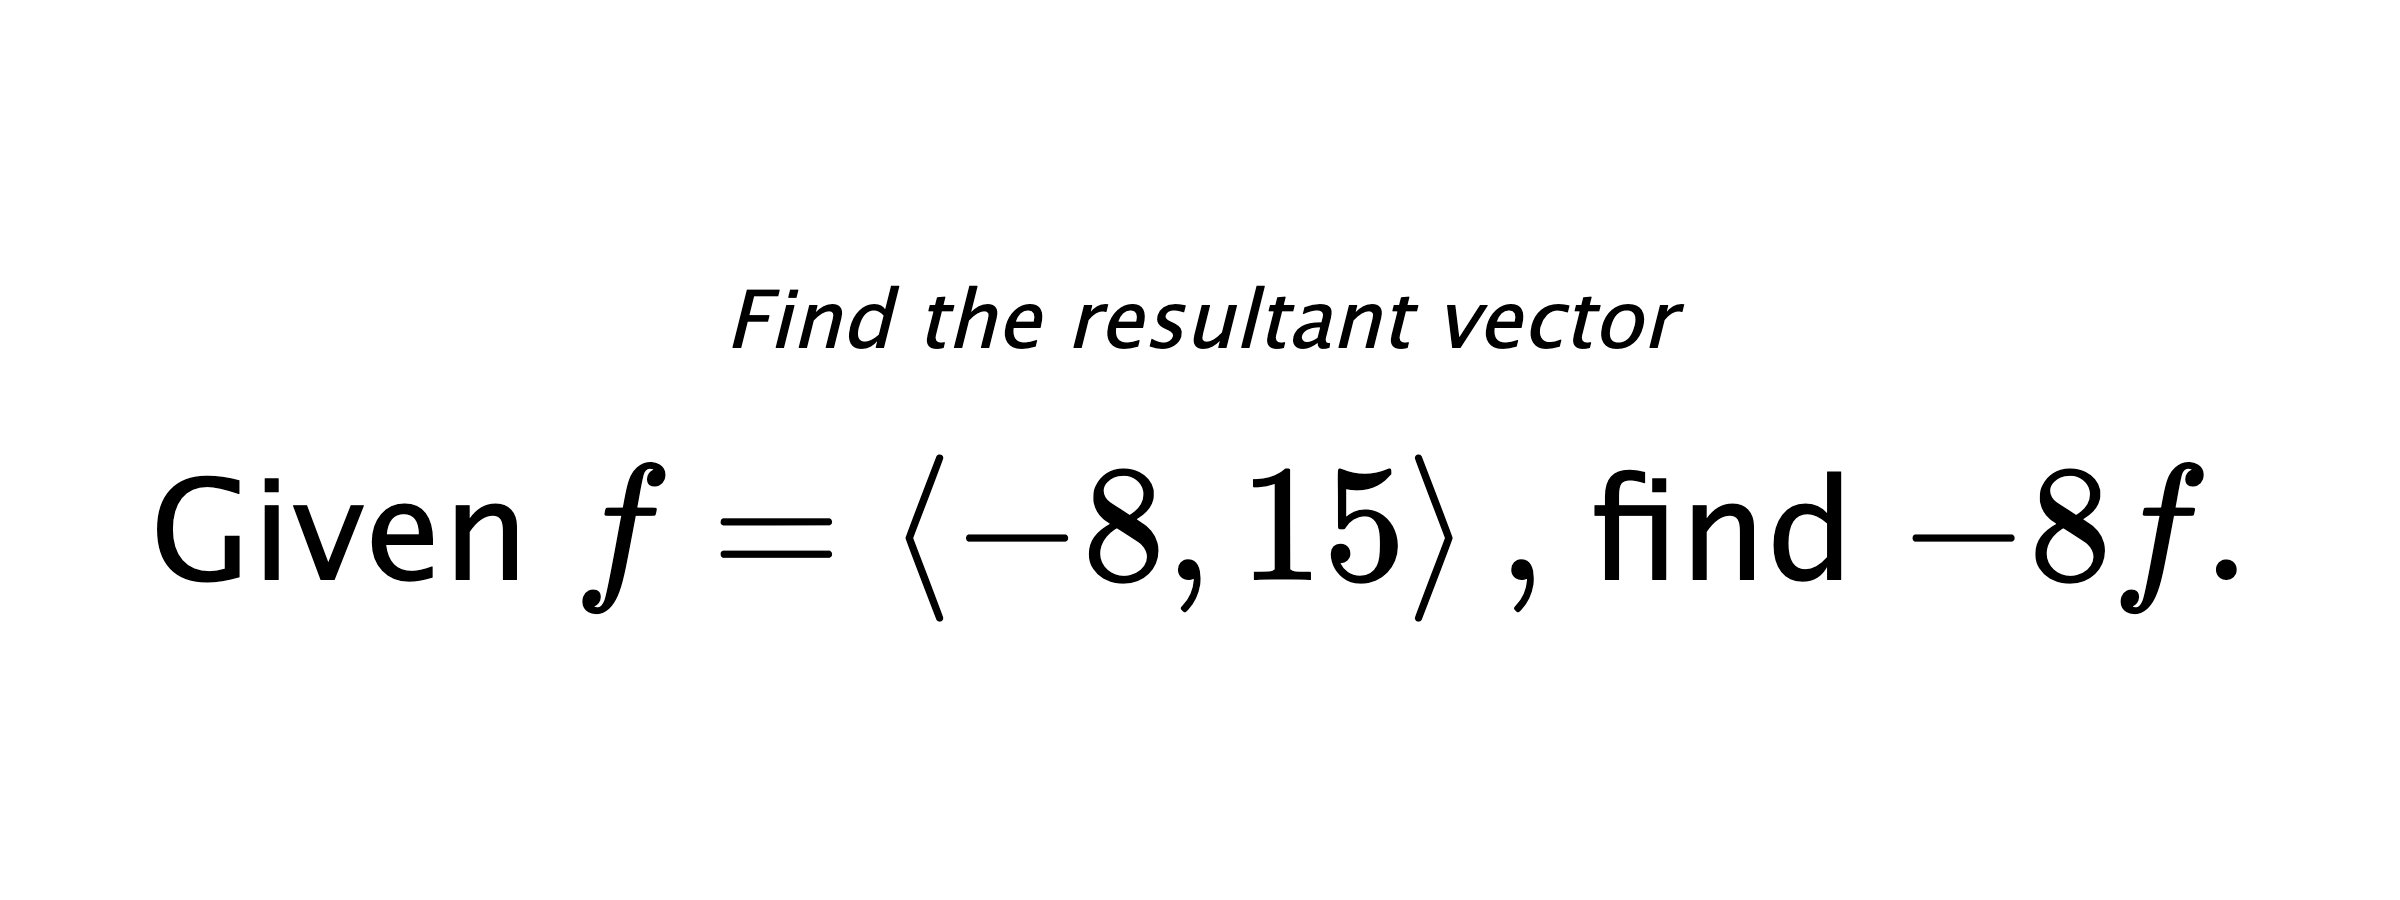 Find the resultant vector Given $ f = \left< -8,15 \right> ,$ find $ -8f .$